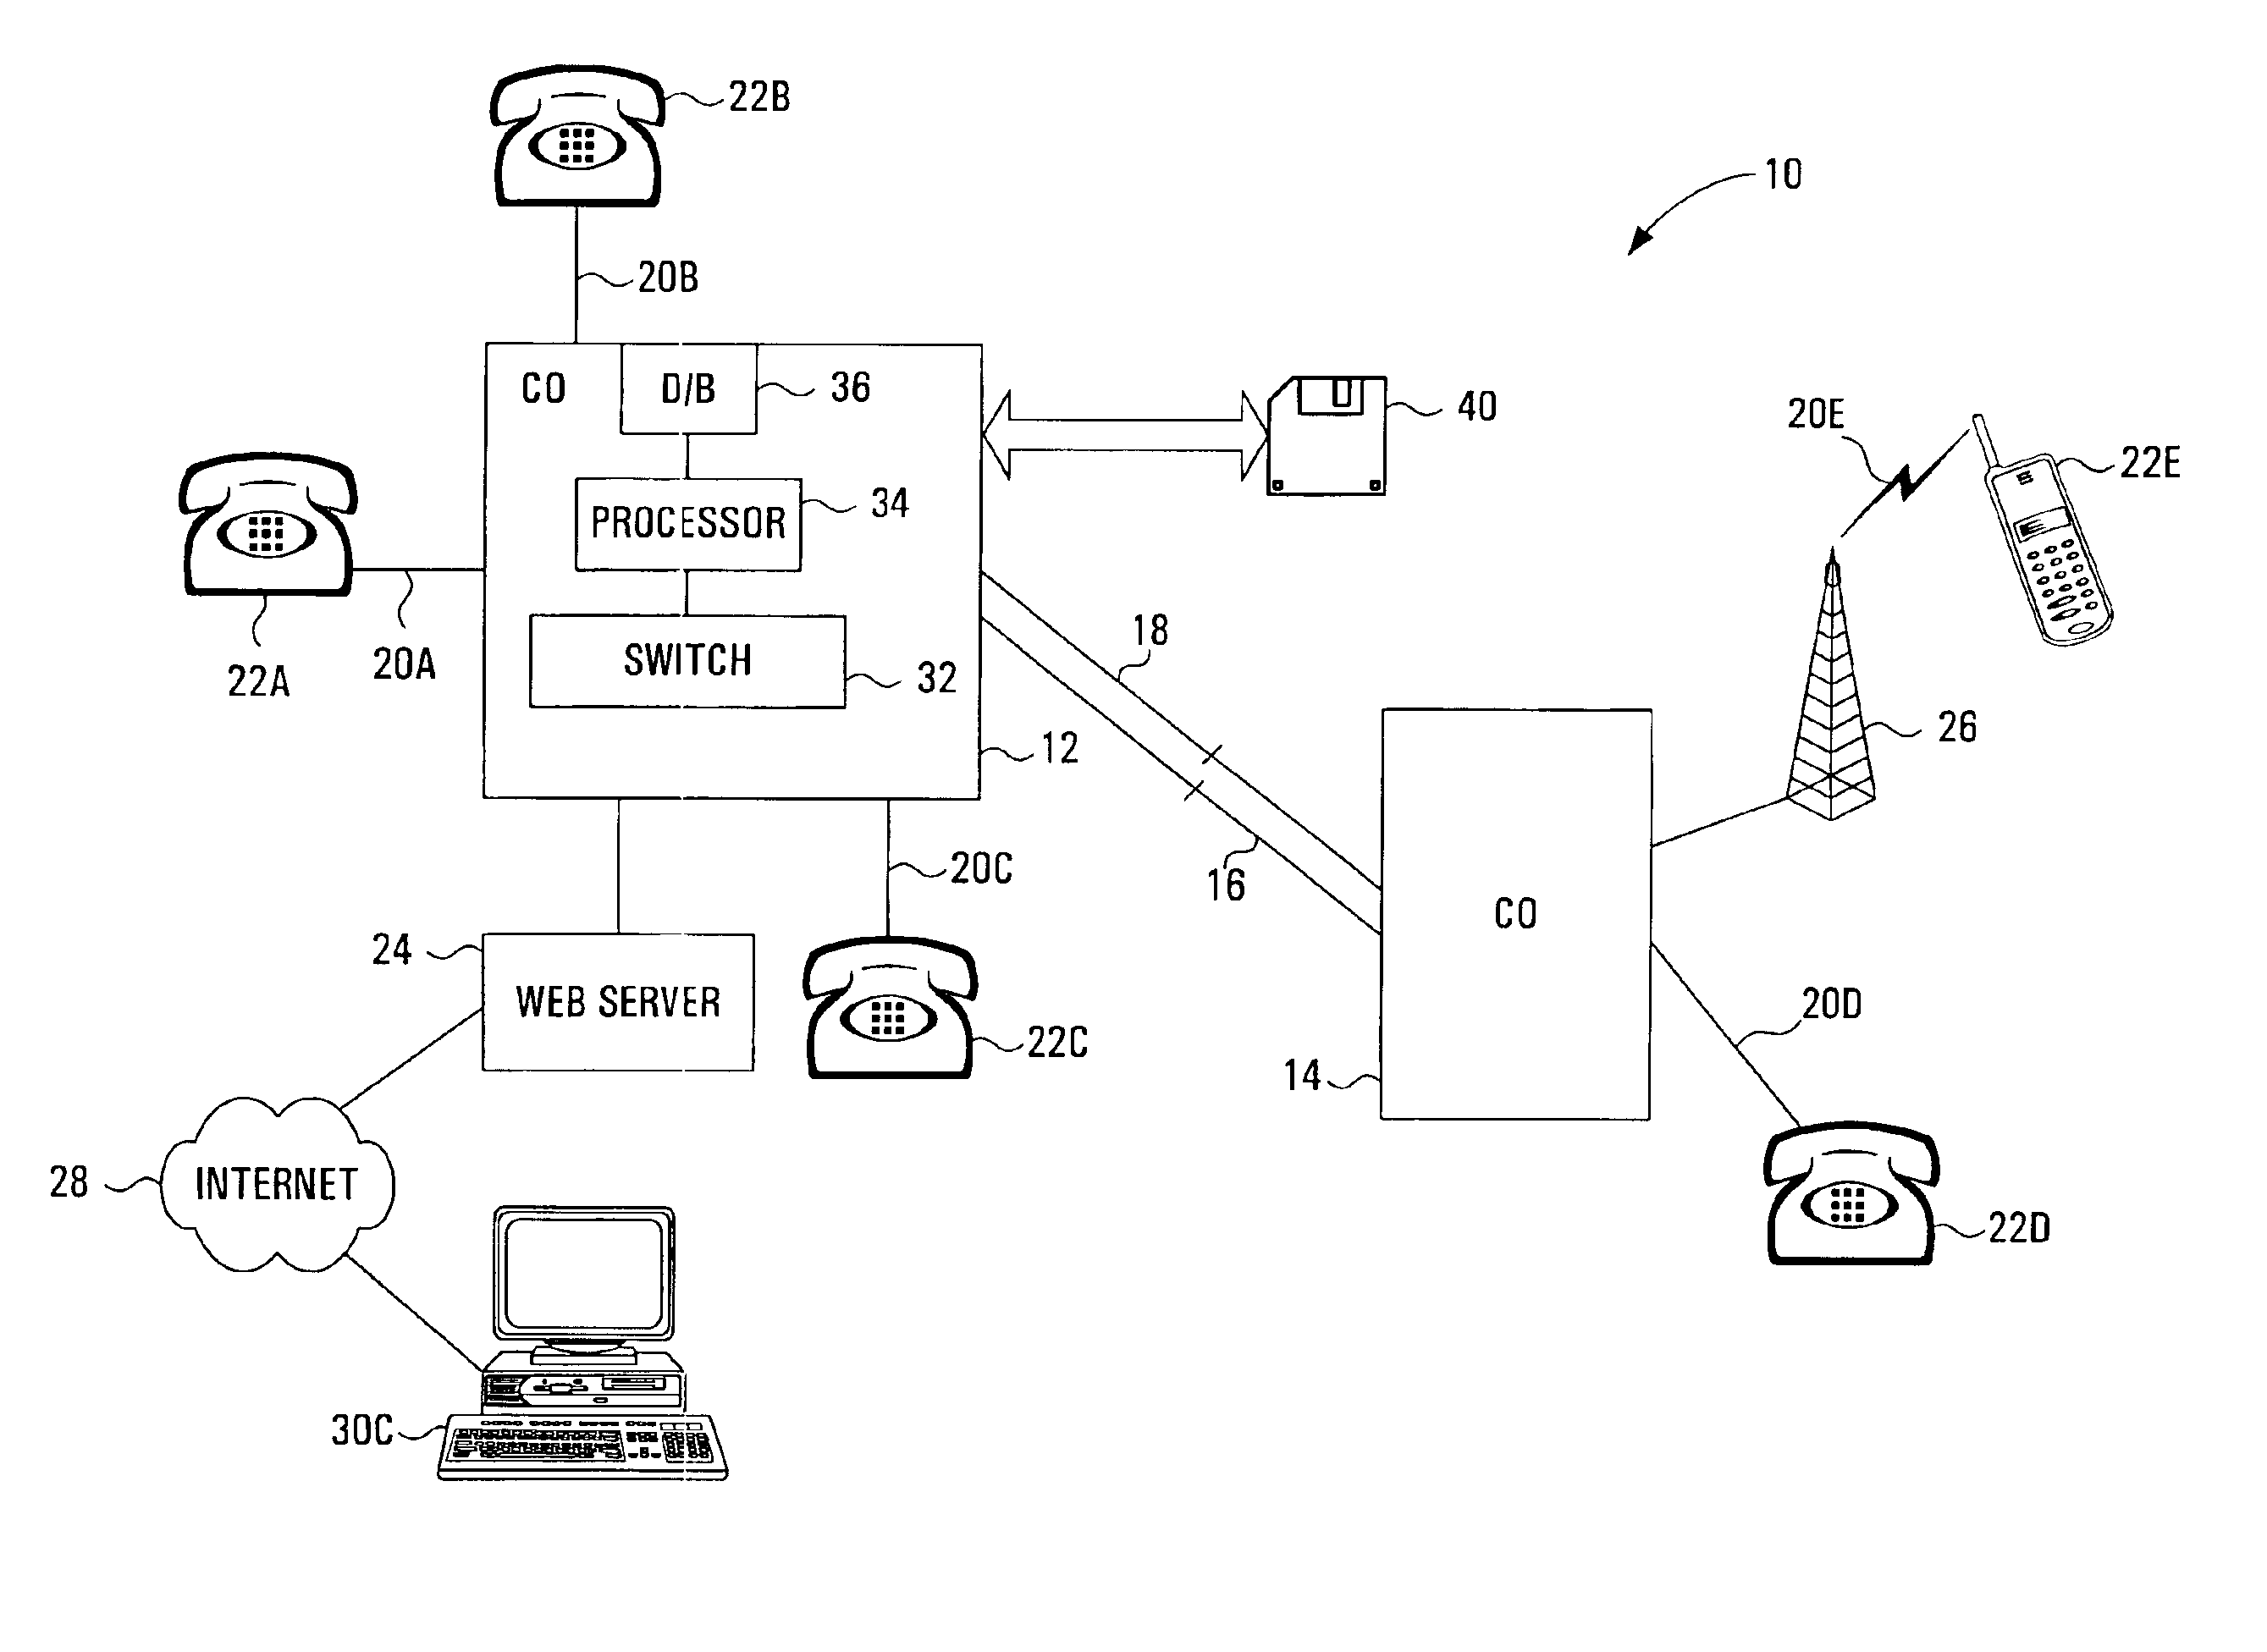 User controlled location sharing during a communication